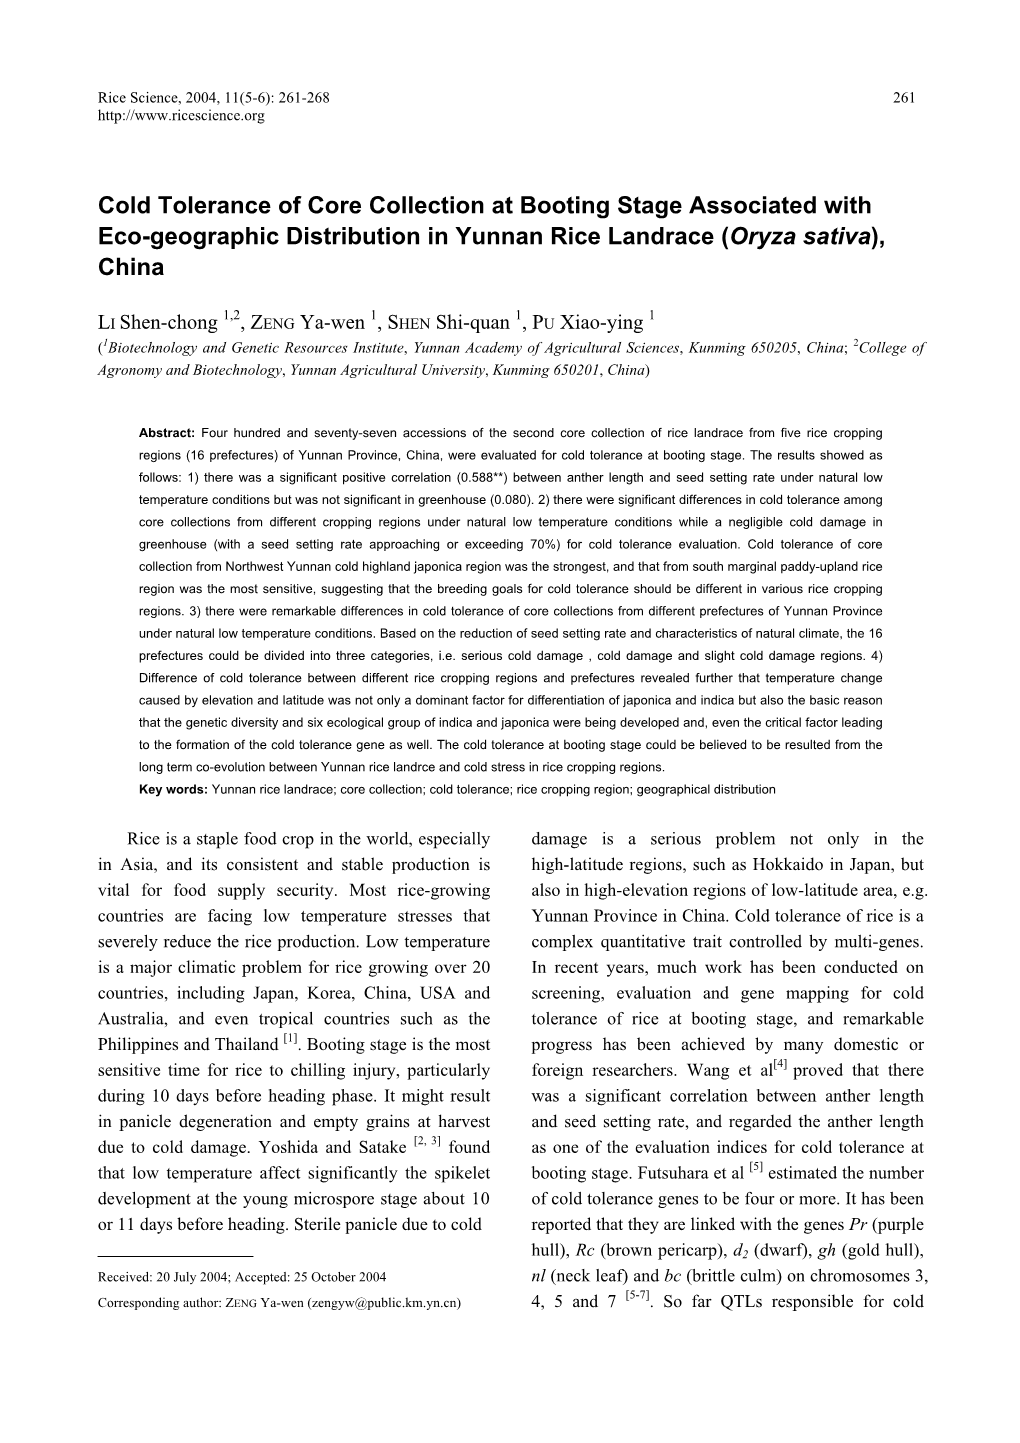 Cold Tolerance of Core Collection at Booting Stage Associated with Eco-Geographic Distribution in Yunnan Rice Landrace (Oryza Sativa), China